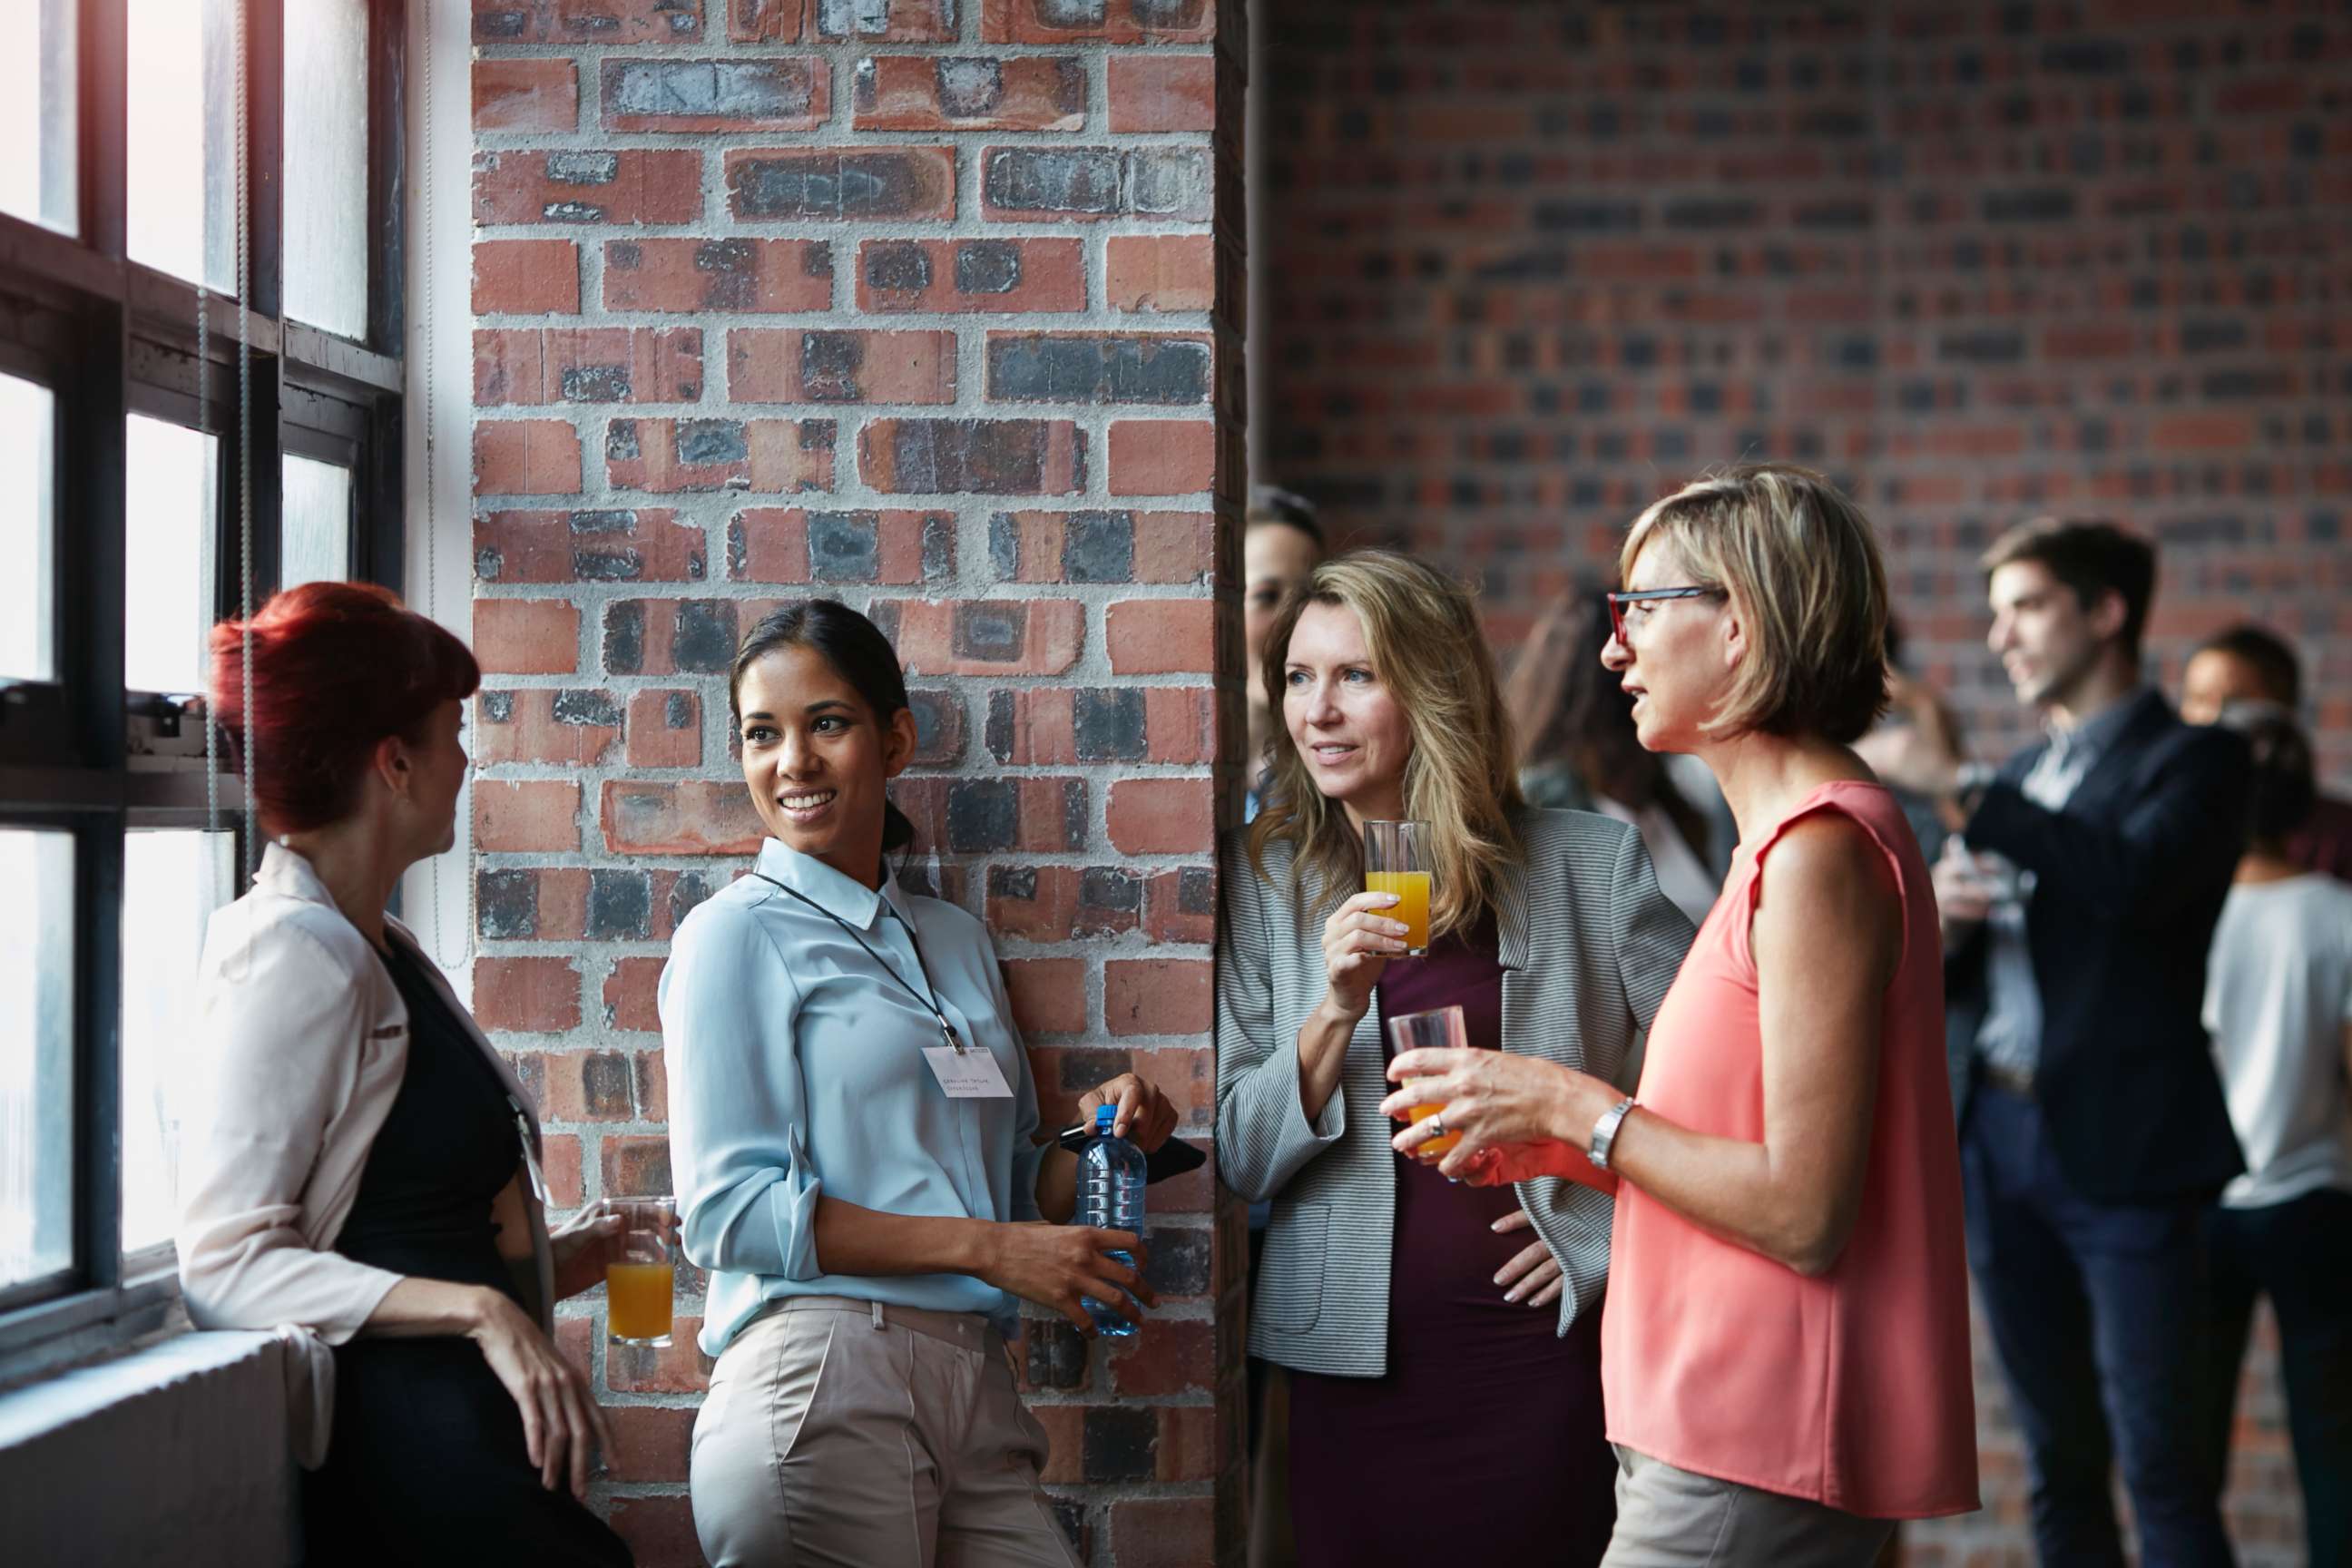 PHOTO: A group of women socialize in this stock photo.